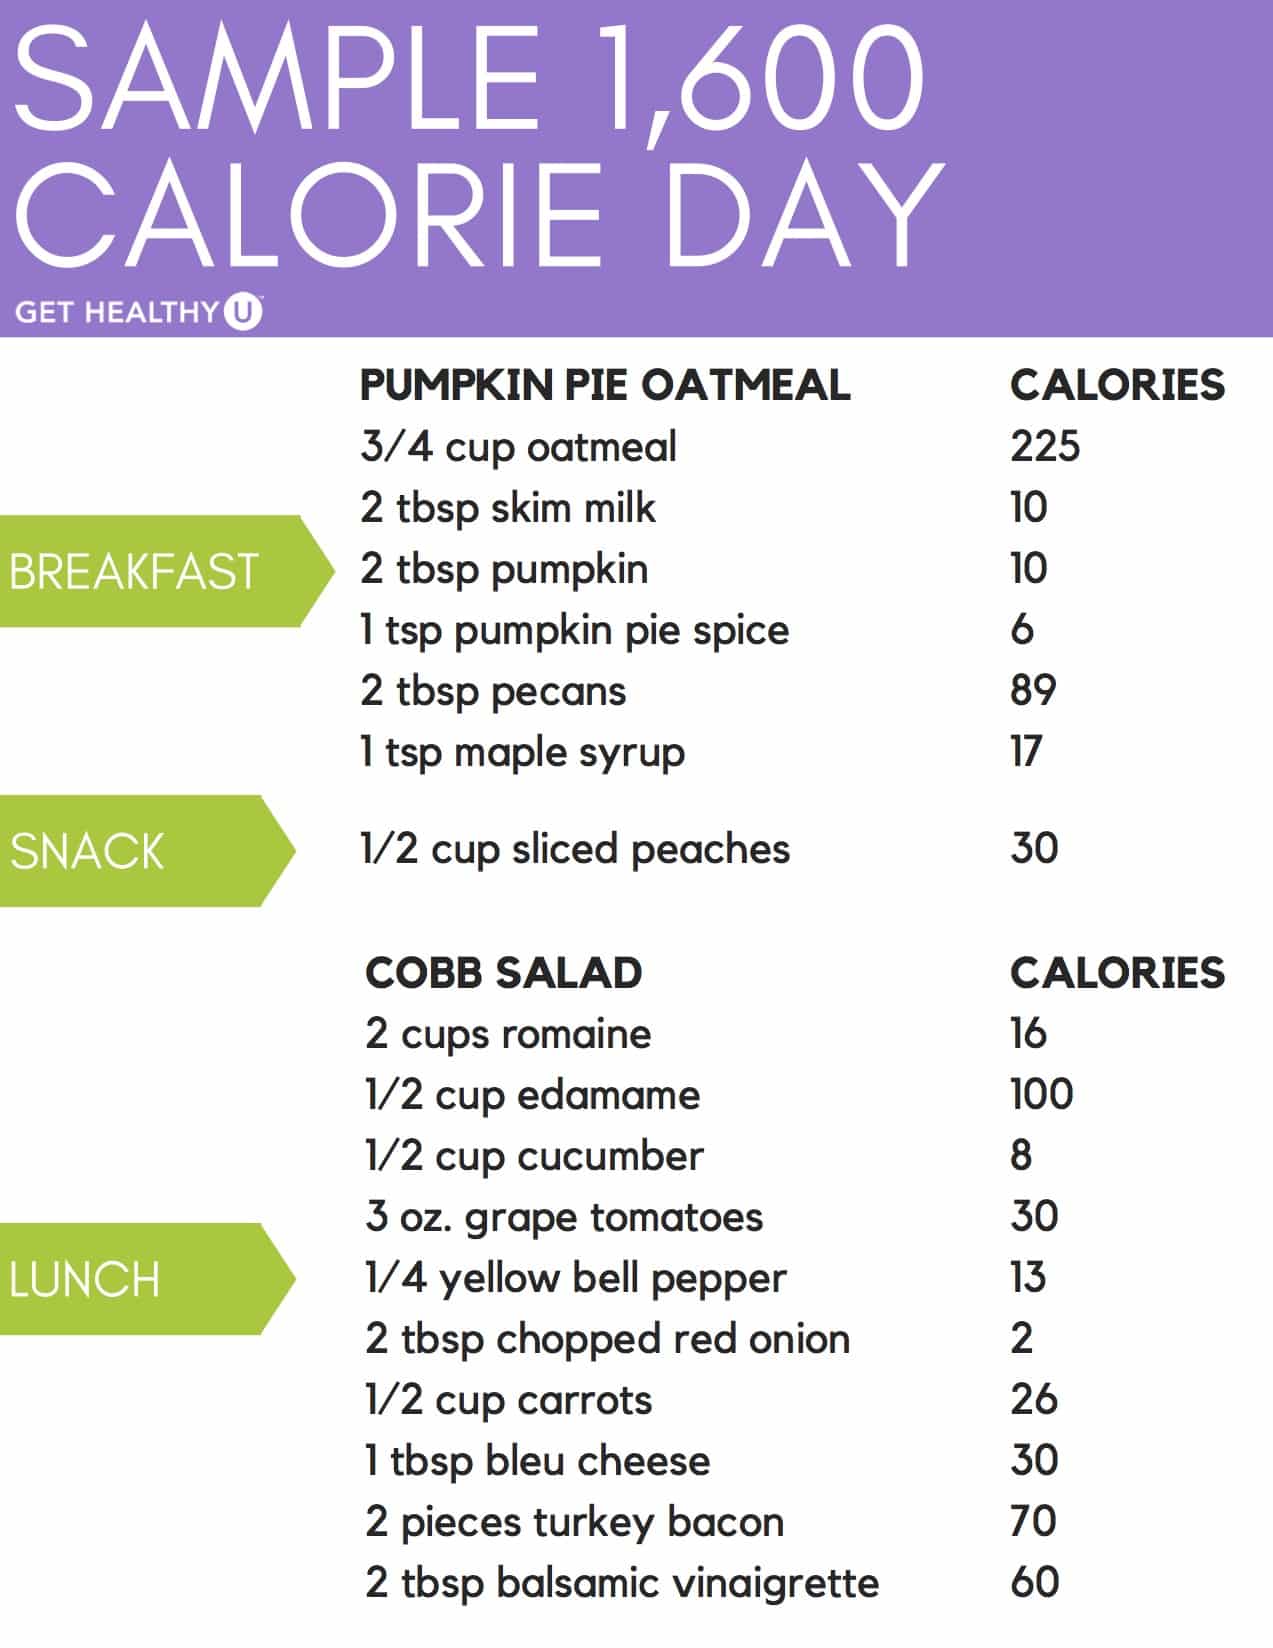 sample 1600 calorie day guide meal plan